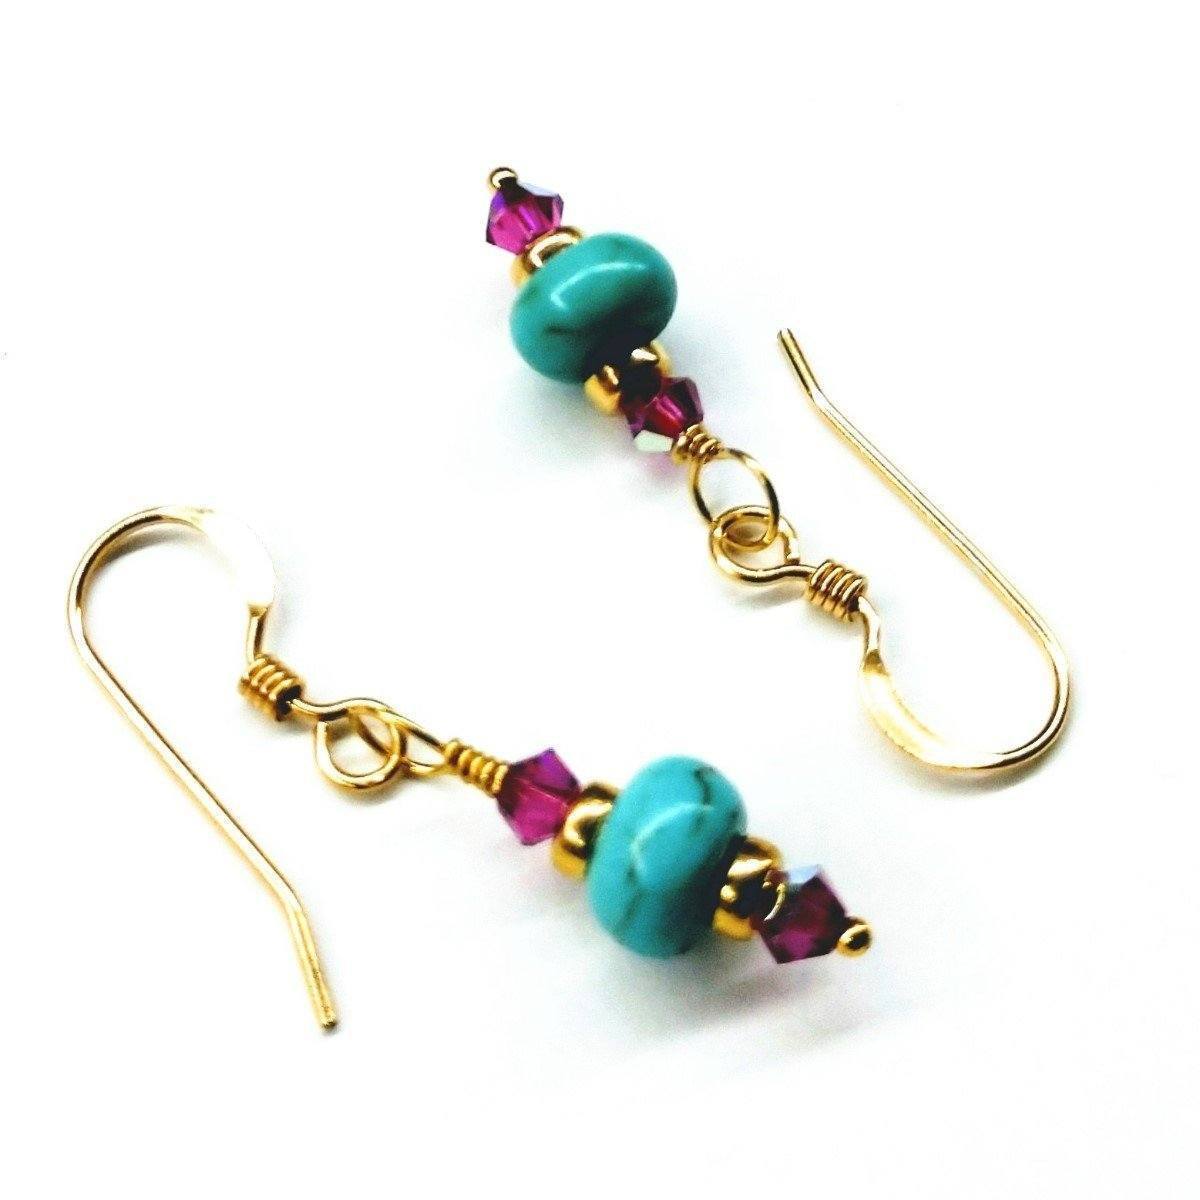 Bright Pink and Turquoise Gold-Filled Earrings with Swarovski Crystals and Heishi Beads Bijou Her